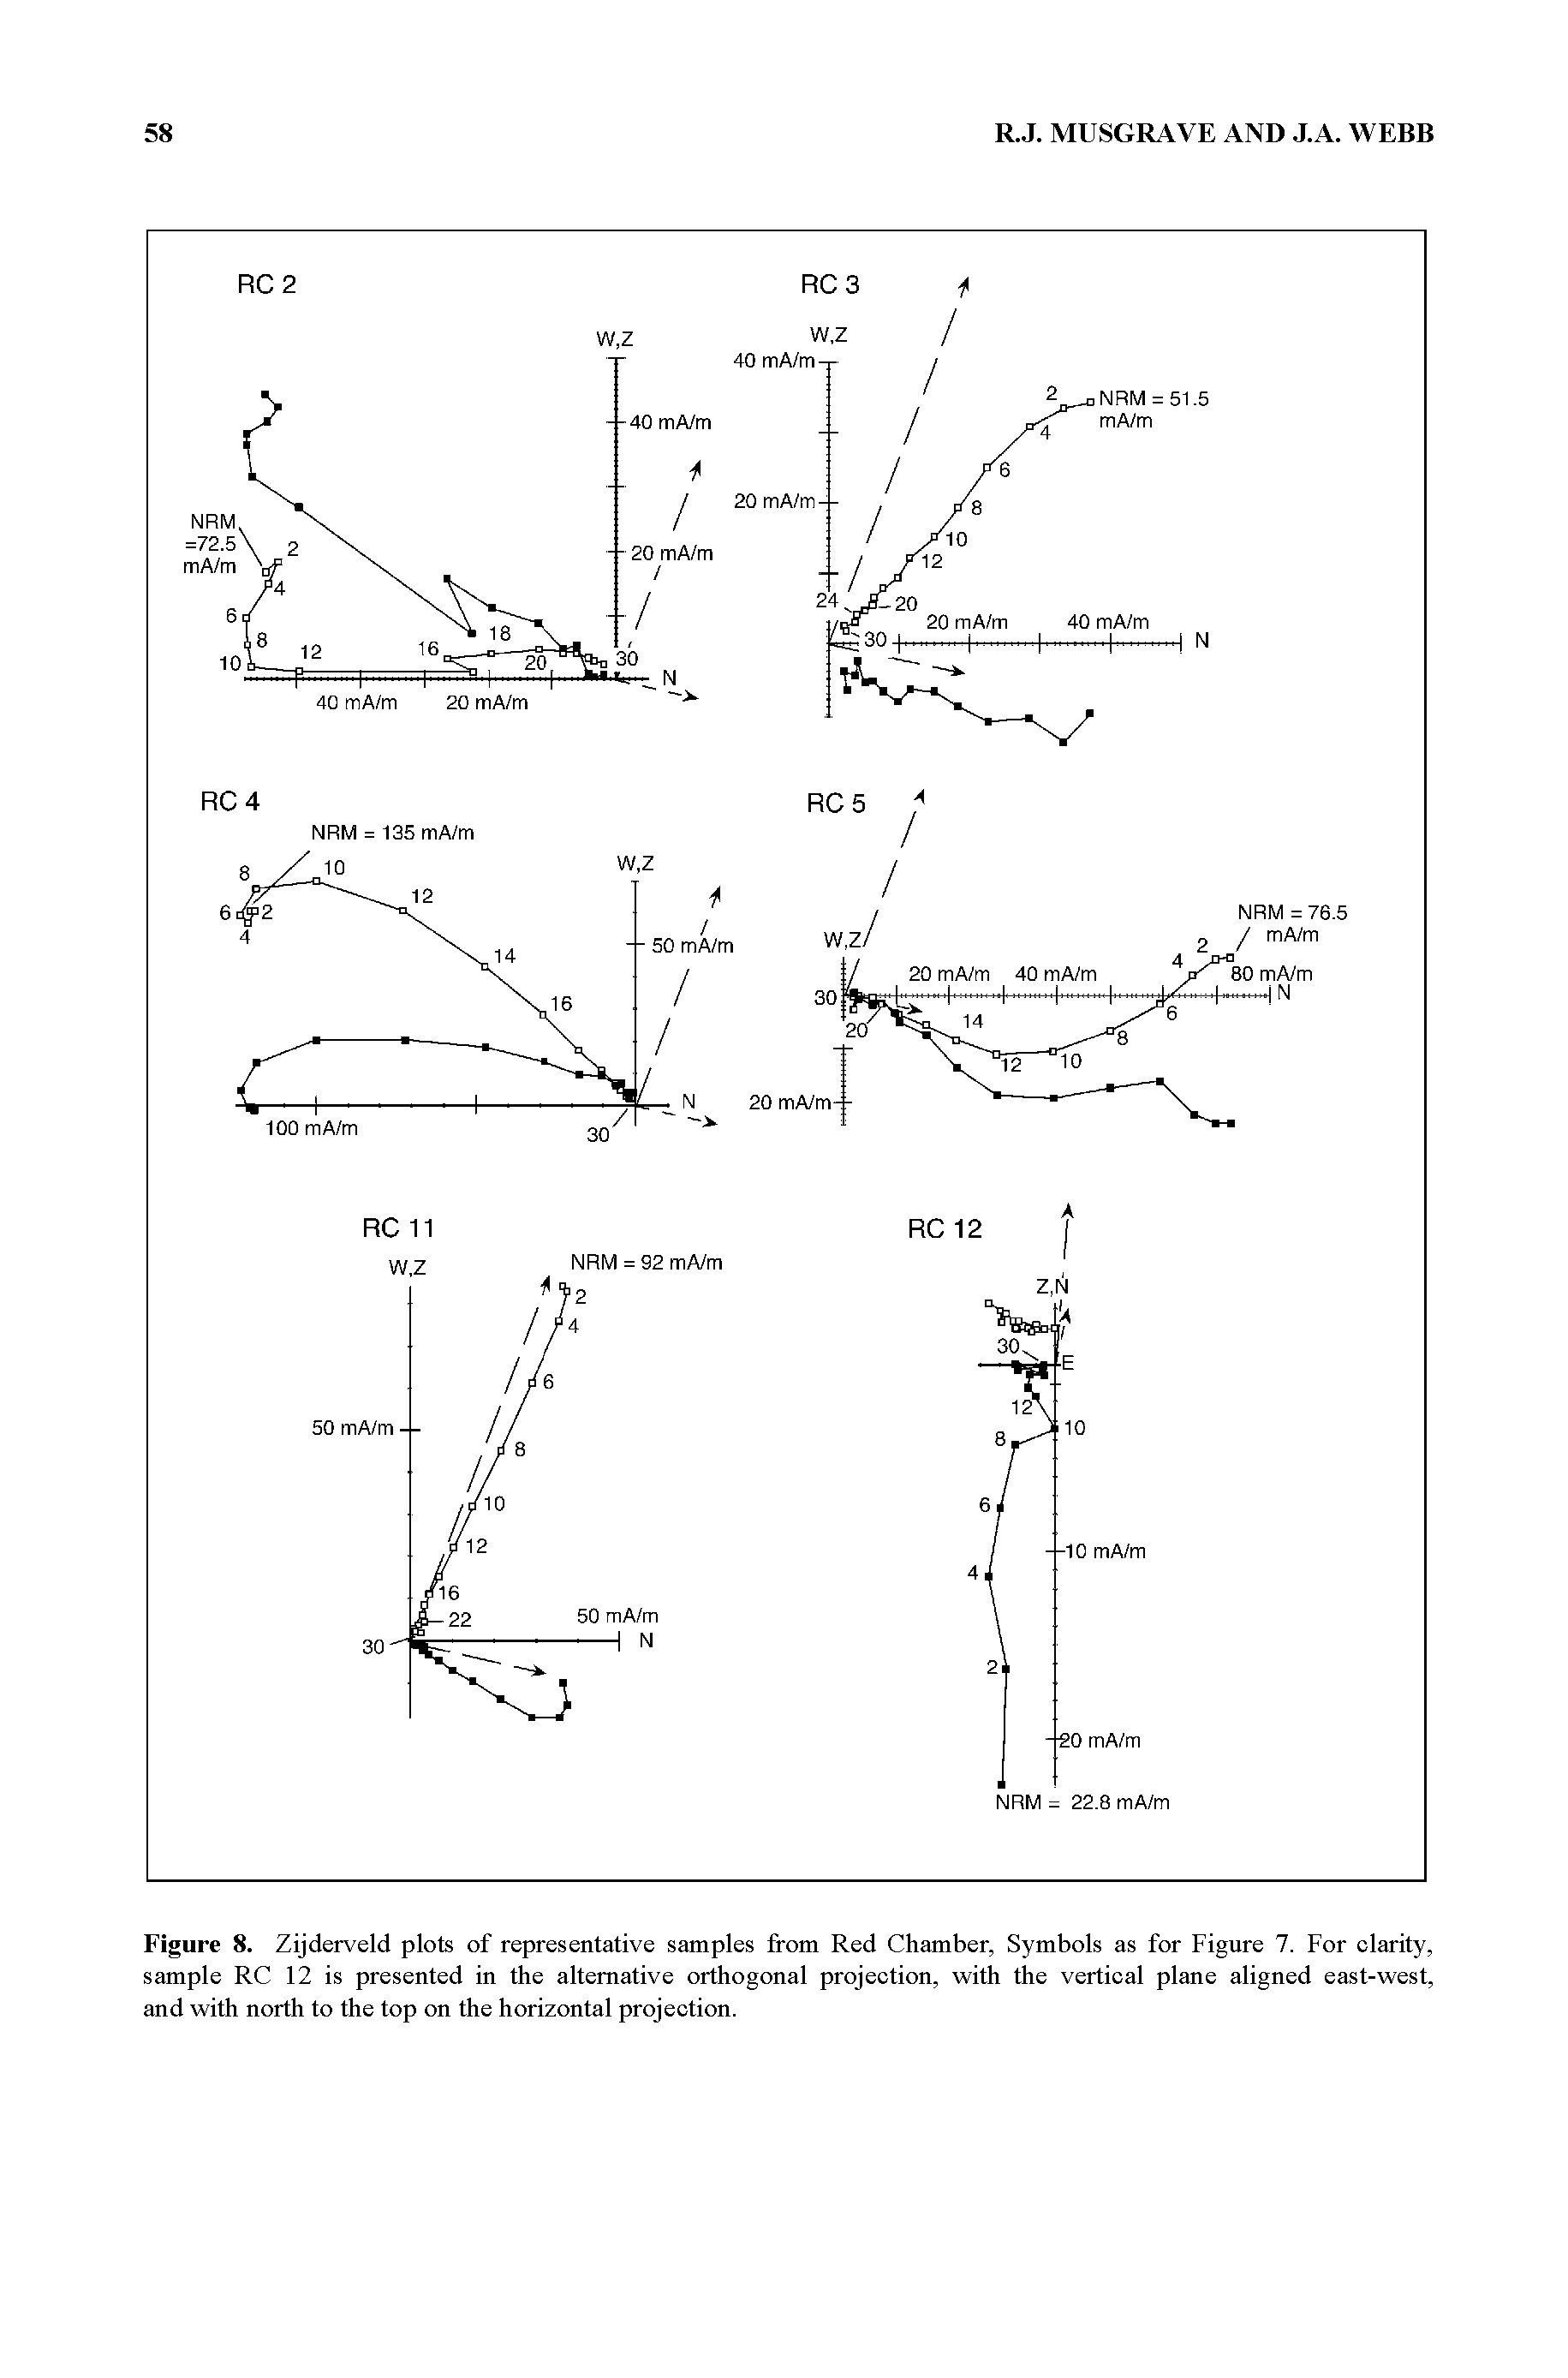 Figure 8. Zijderveld plots of representative samples from Red Chamber, Symbols as for Figure 7. For clarity, sample RC 12 is presented in the alternative orthogonal projection, with the vertical plane aligned east-west, and with north to the top on the horizontal projection.